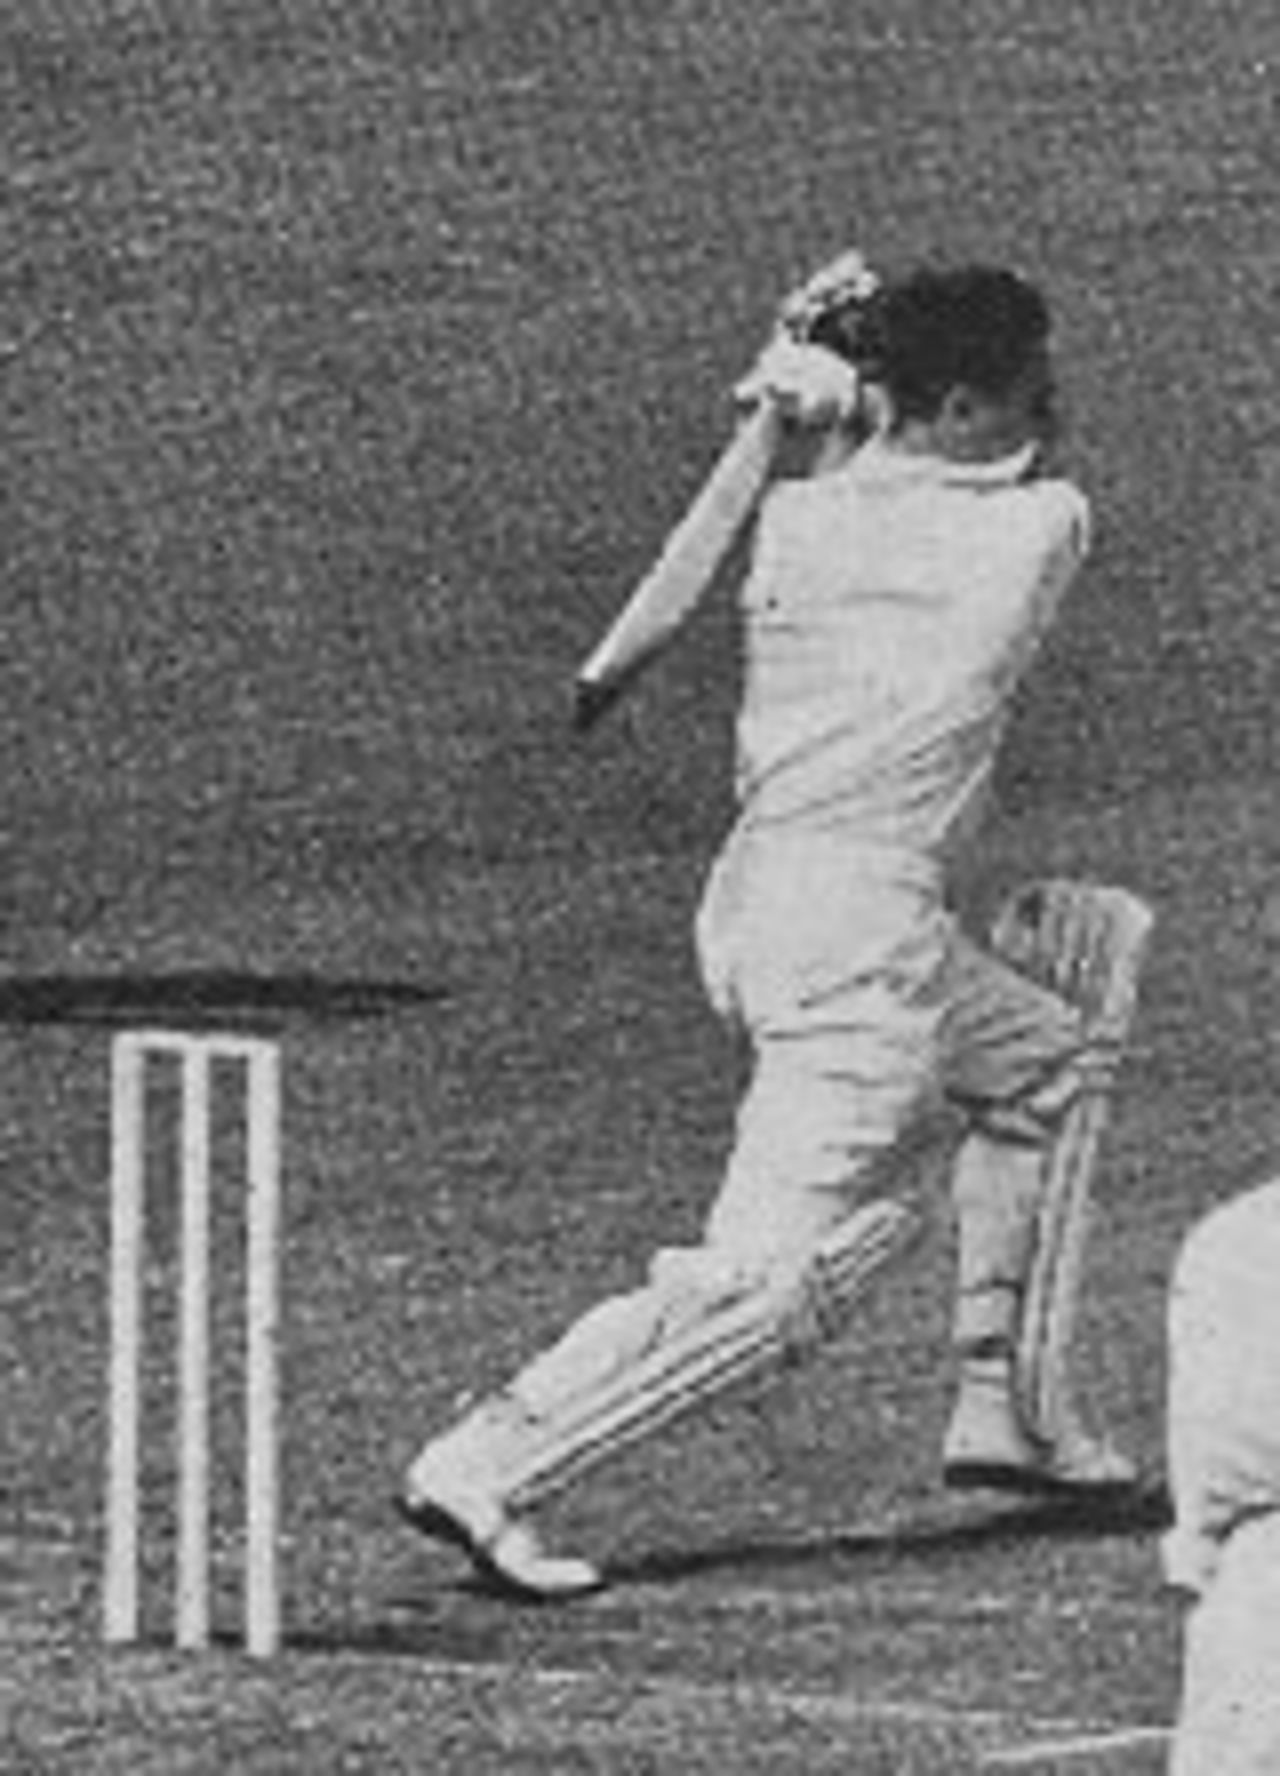 An uncharacteristic attacking stroke from Trevor Bailey, England v Australia, Lord's, 1953